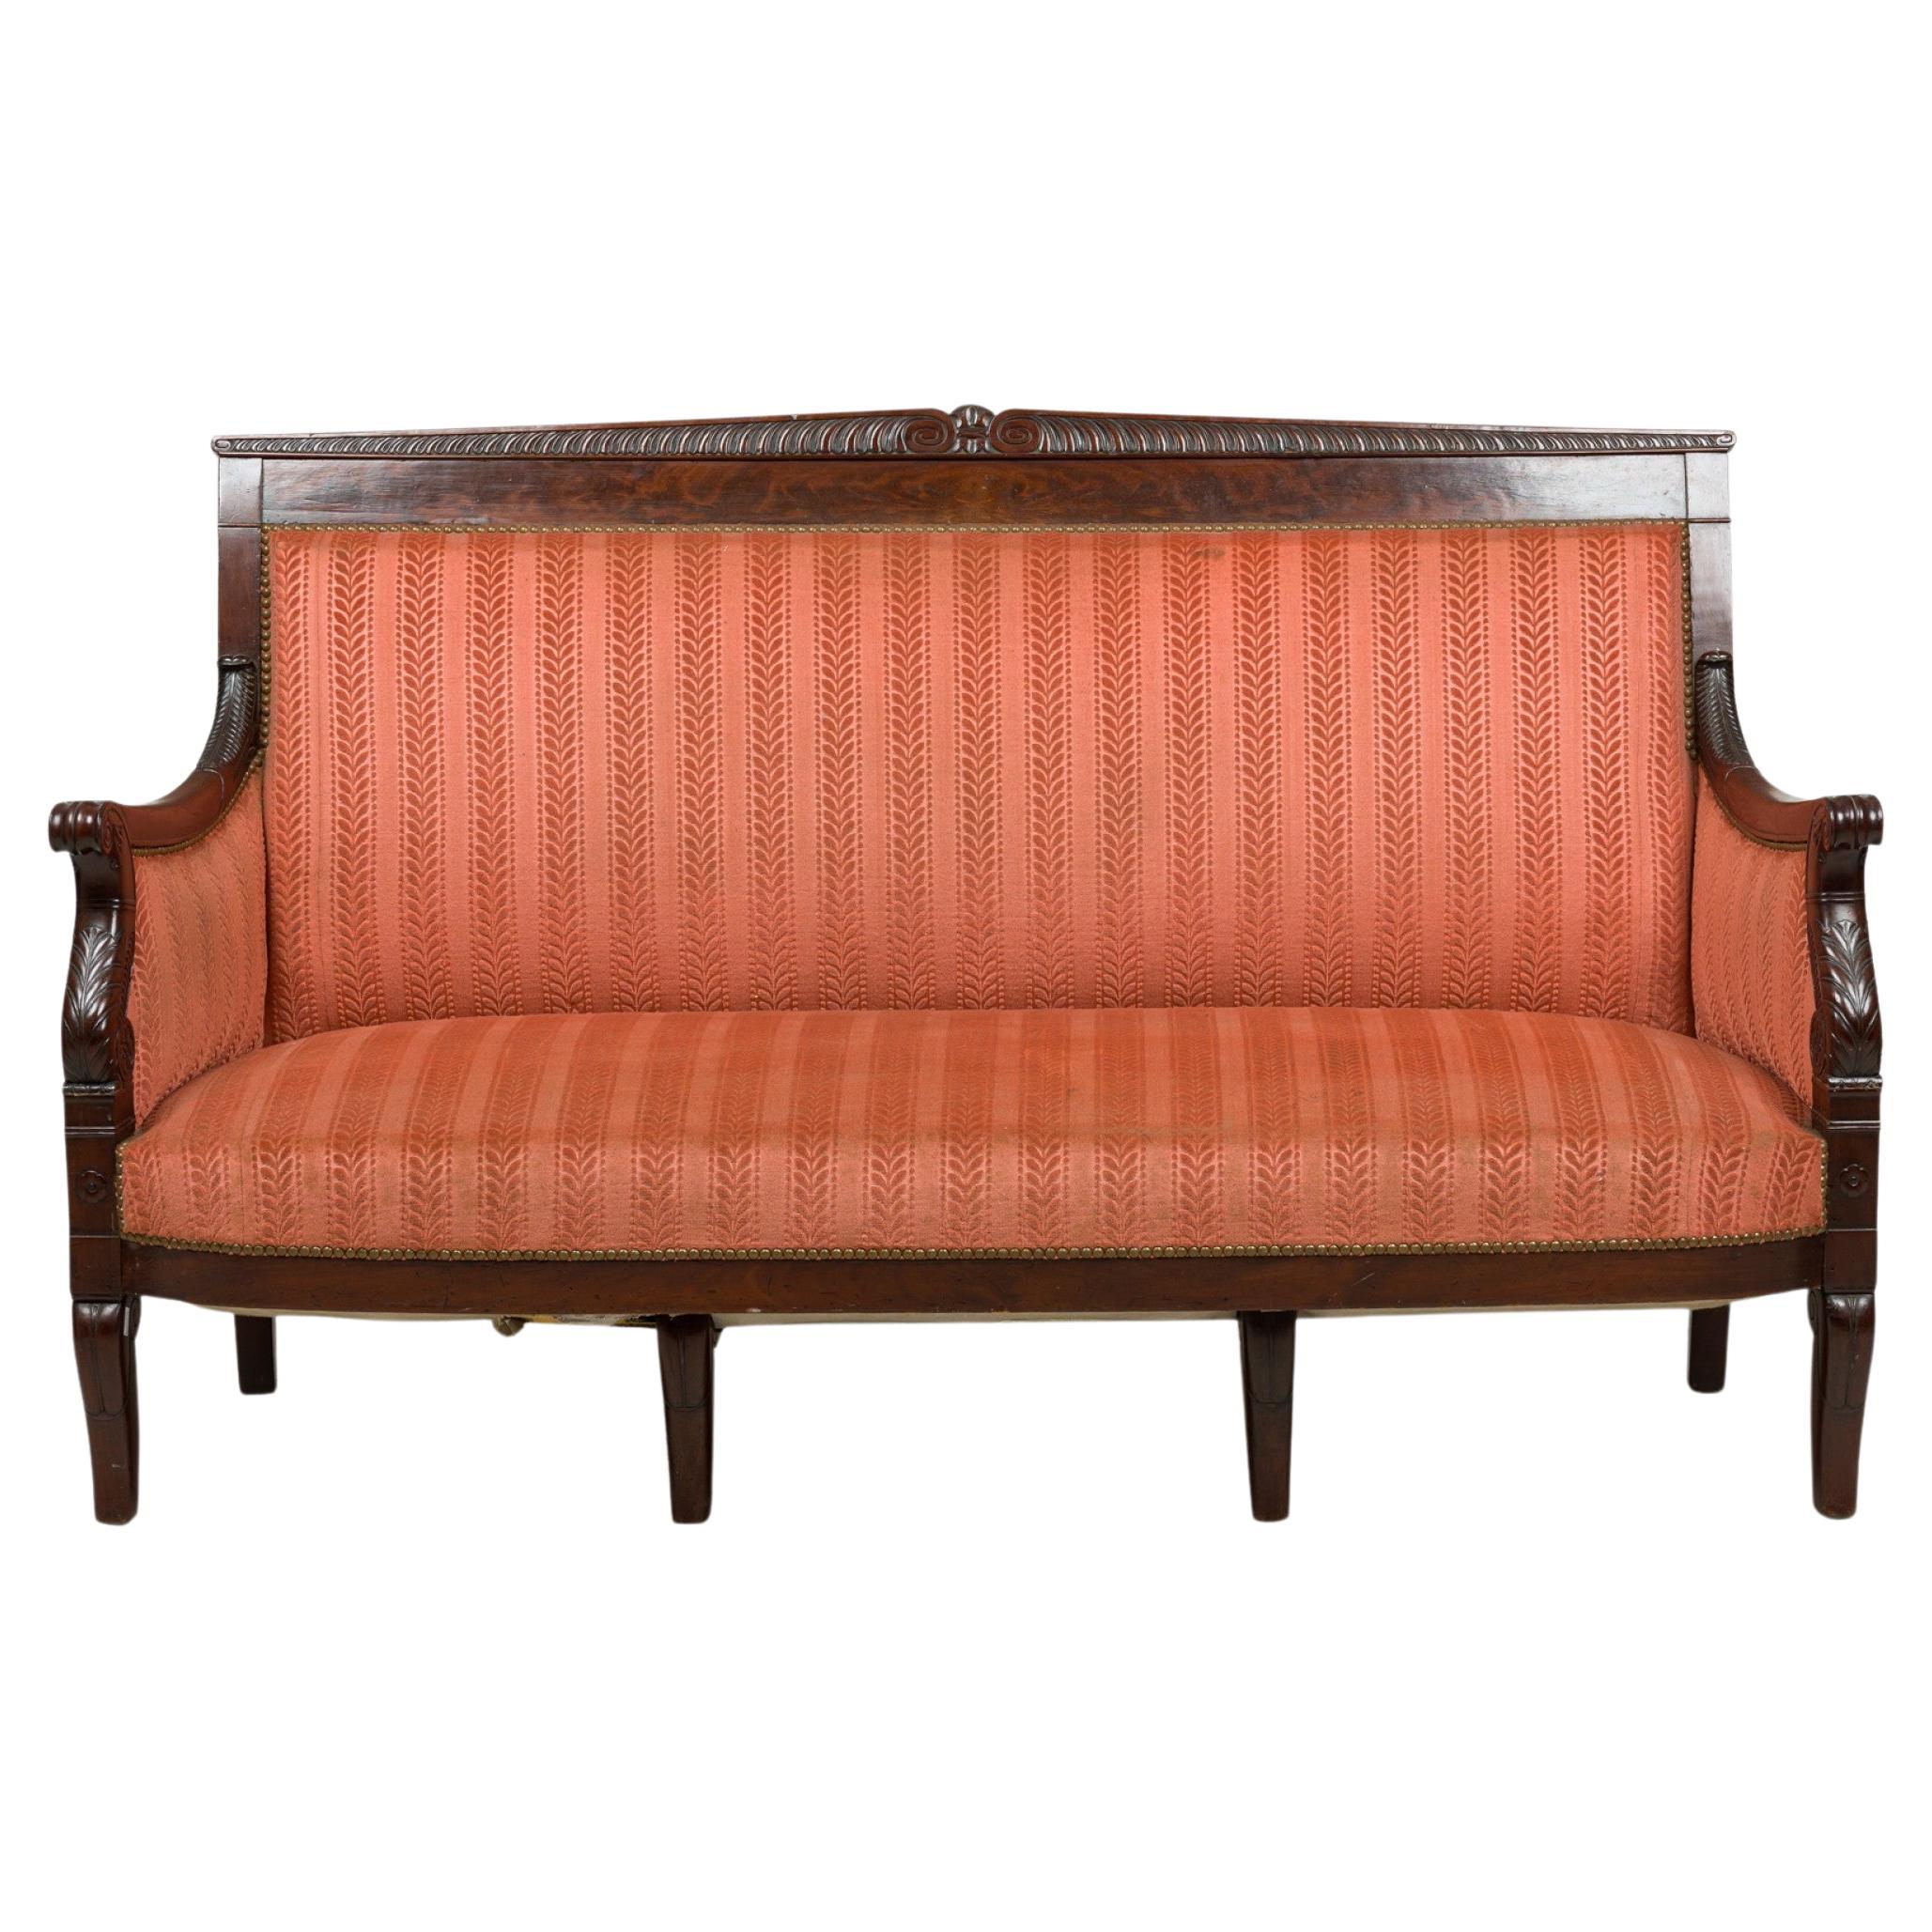 Bellanger French Empire Mahogany Pink and Red Stripe Upholstered Settee